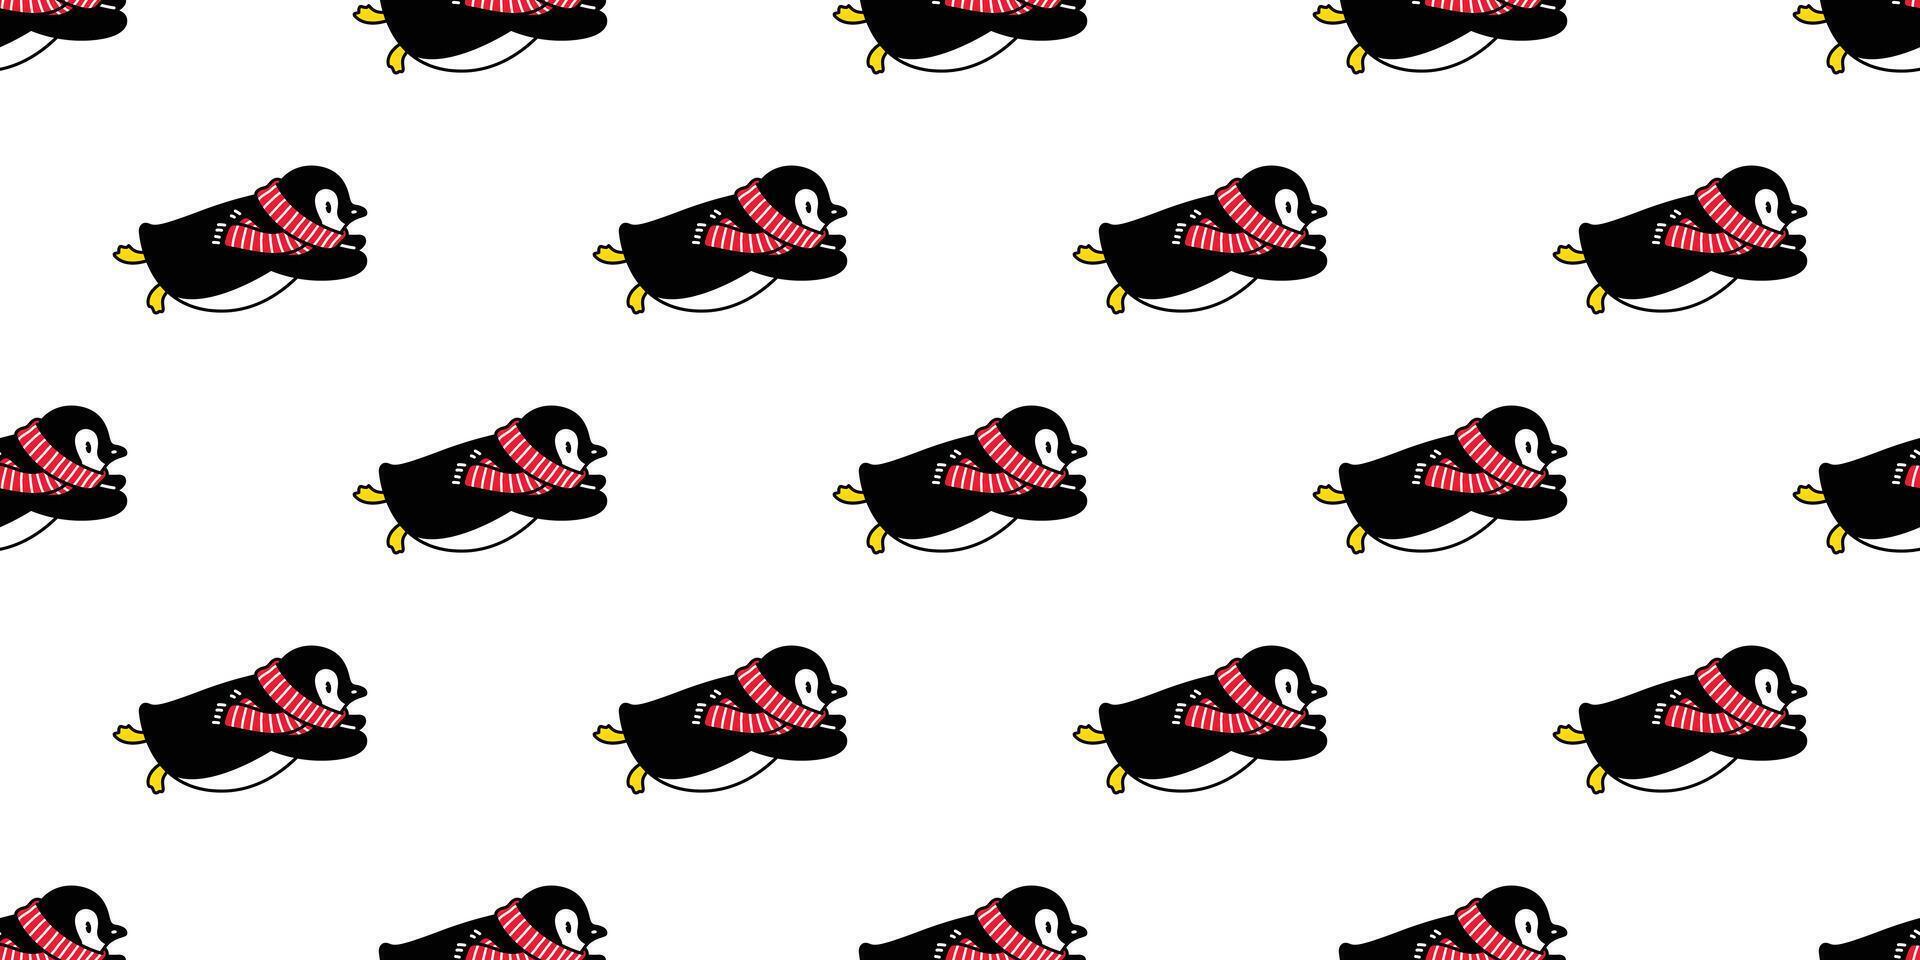 penguin Seamless pattern christmas santa claus hat bird cartoon scarf isolated repeat wallpaper tile background illustration doodle design vector